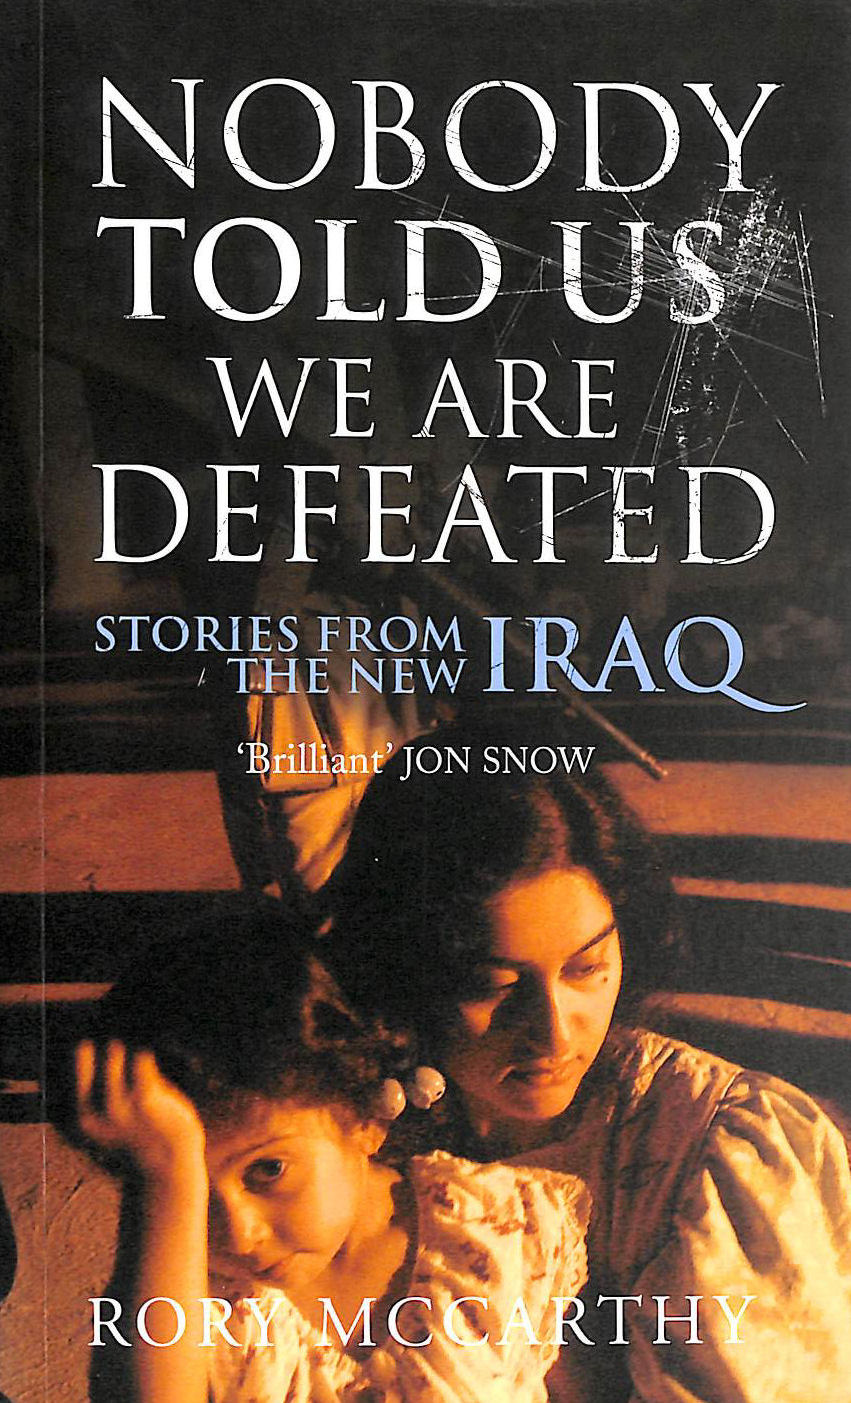 MCCARTHY, RORY - Nobody Told Us We Are Defeated: Stories From The New Iraq (Chatto & Windus Paperback Original)